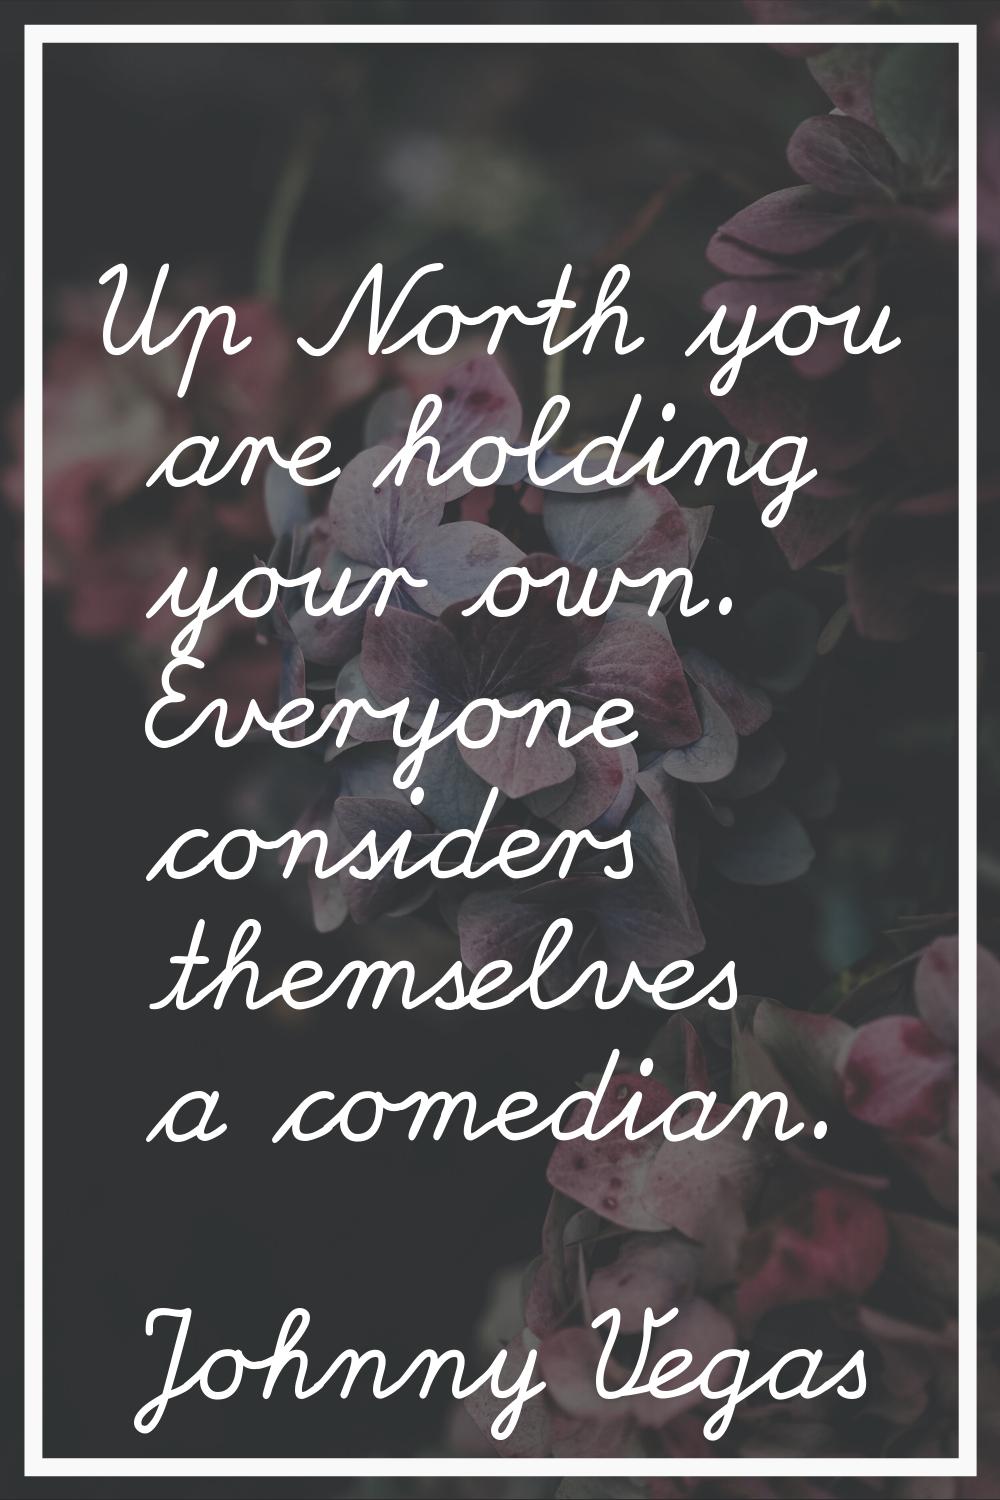 Up North you are holding your own. Everyone considers themselves a comedian.